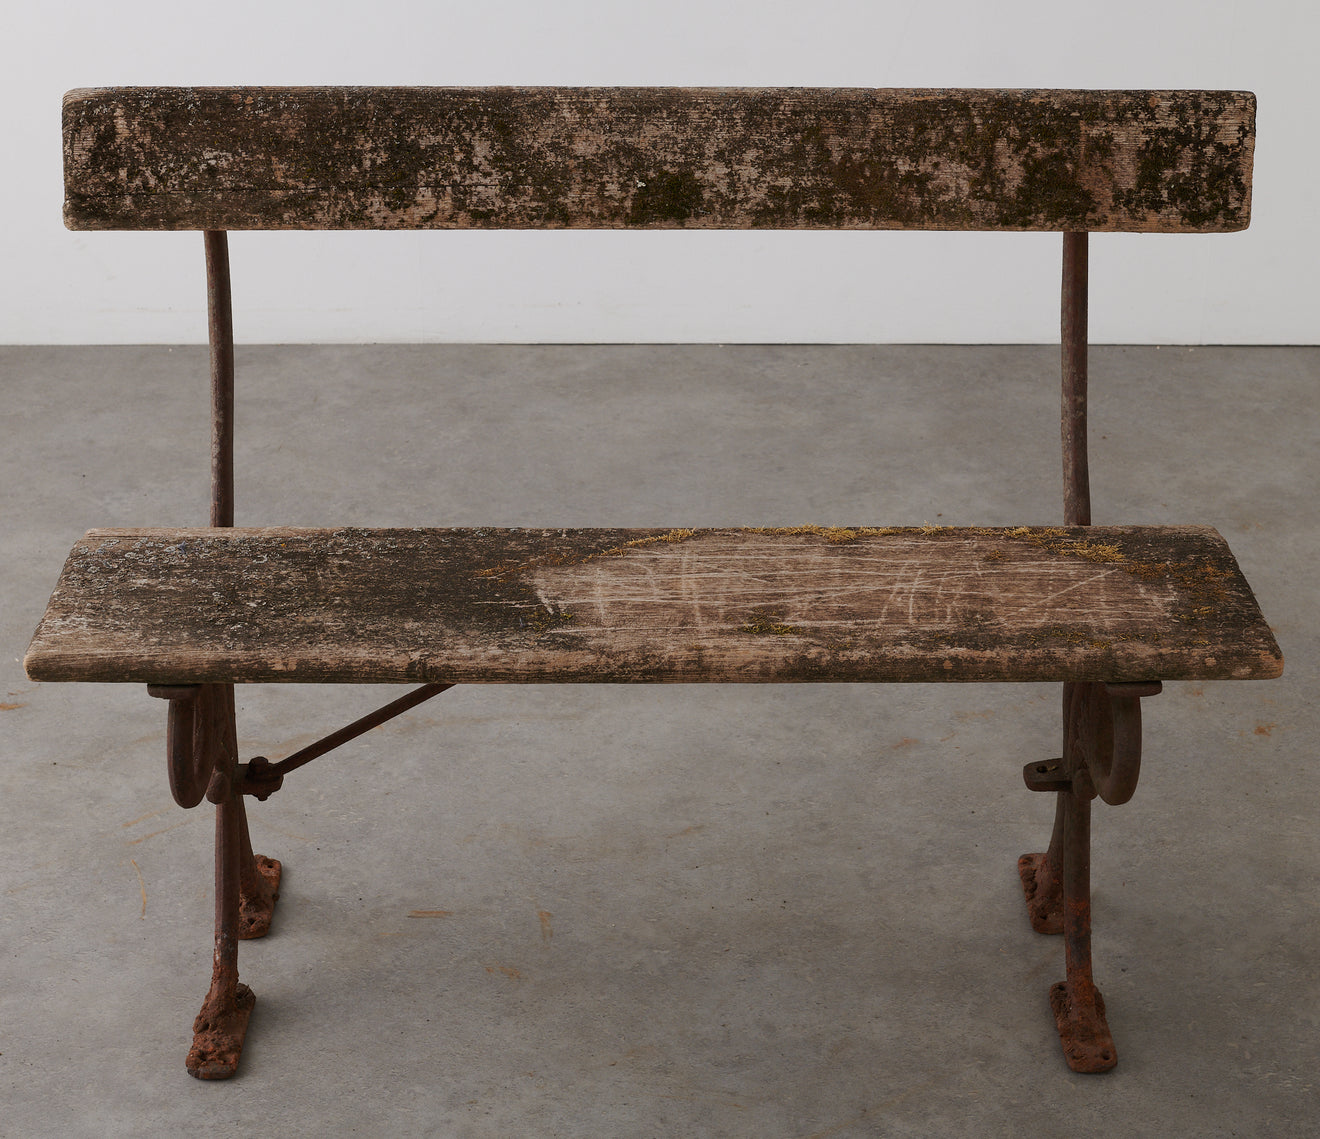 PAIR OF LATE 19TH C WOOD AND IRON BENCHES